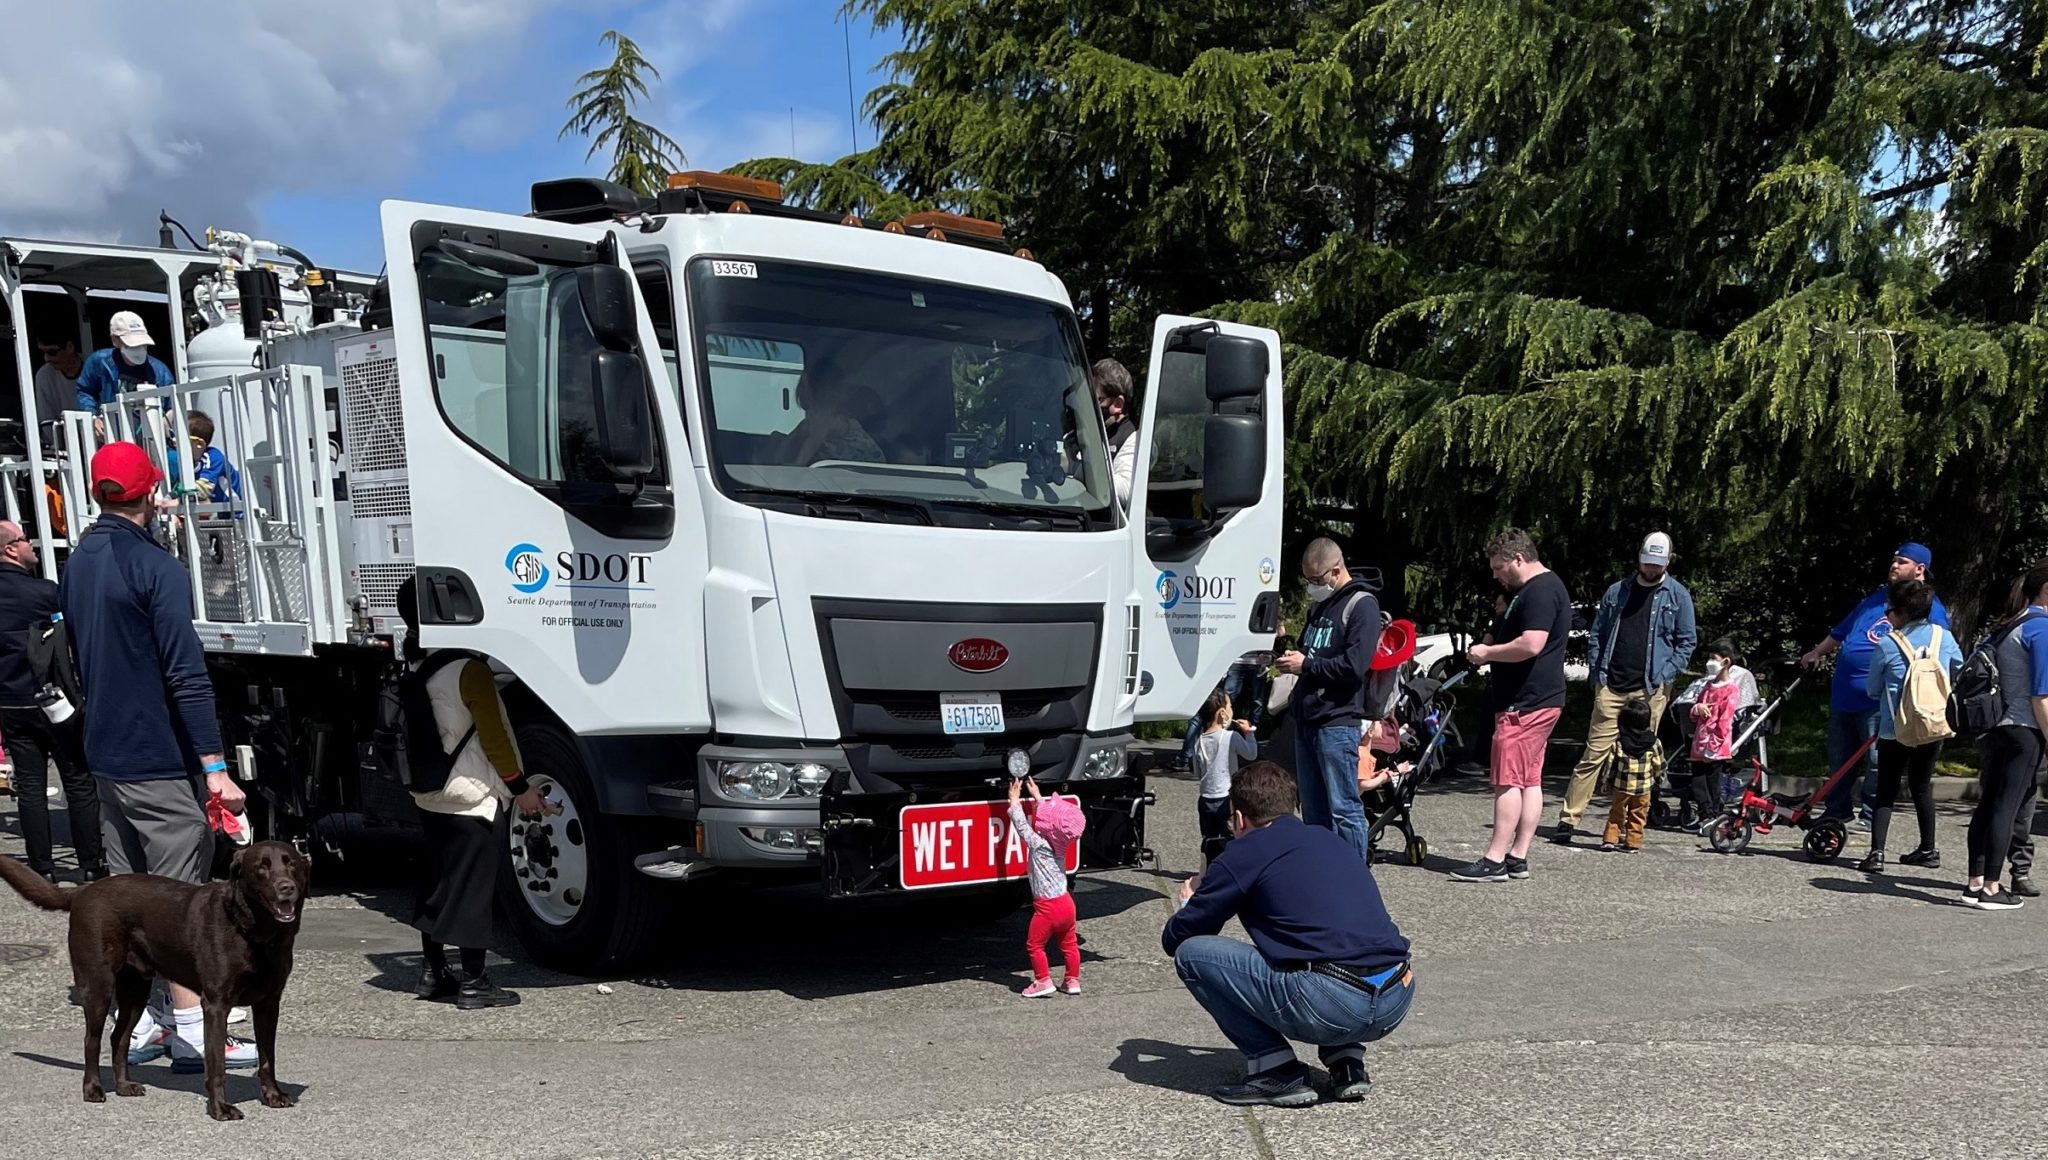 A youngster checks out the front of the SDOT paint truck while other attendees step into the driver’s seat and walk around the back end.